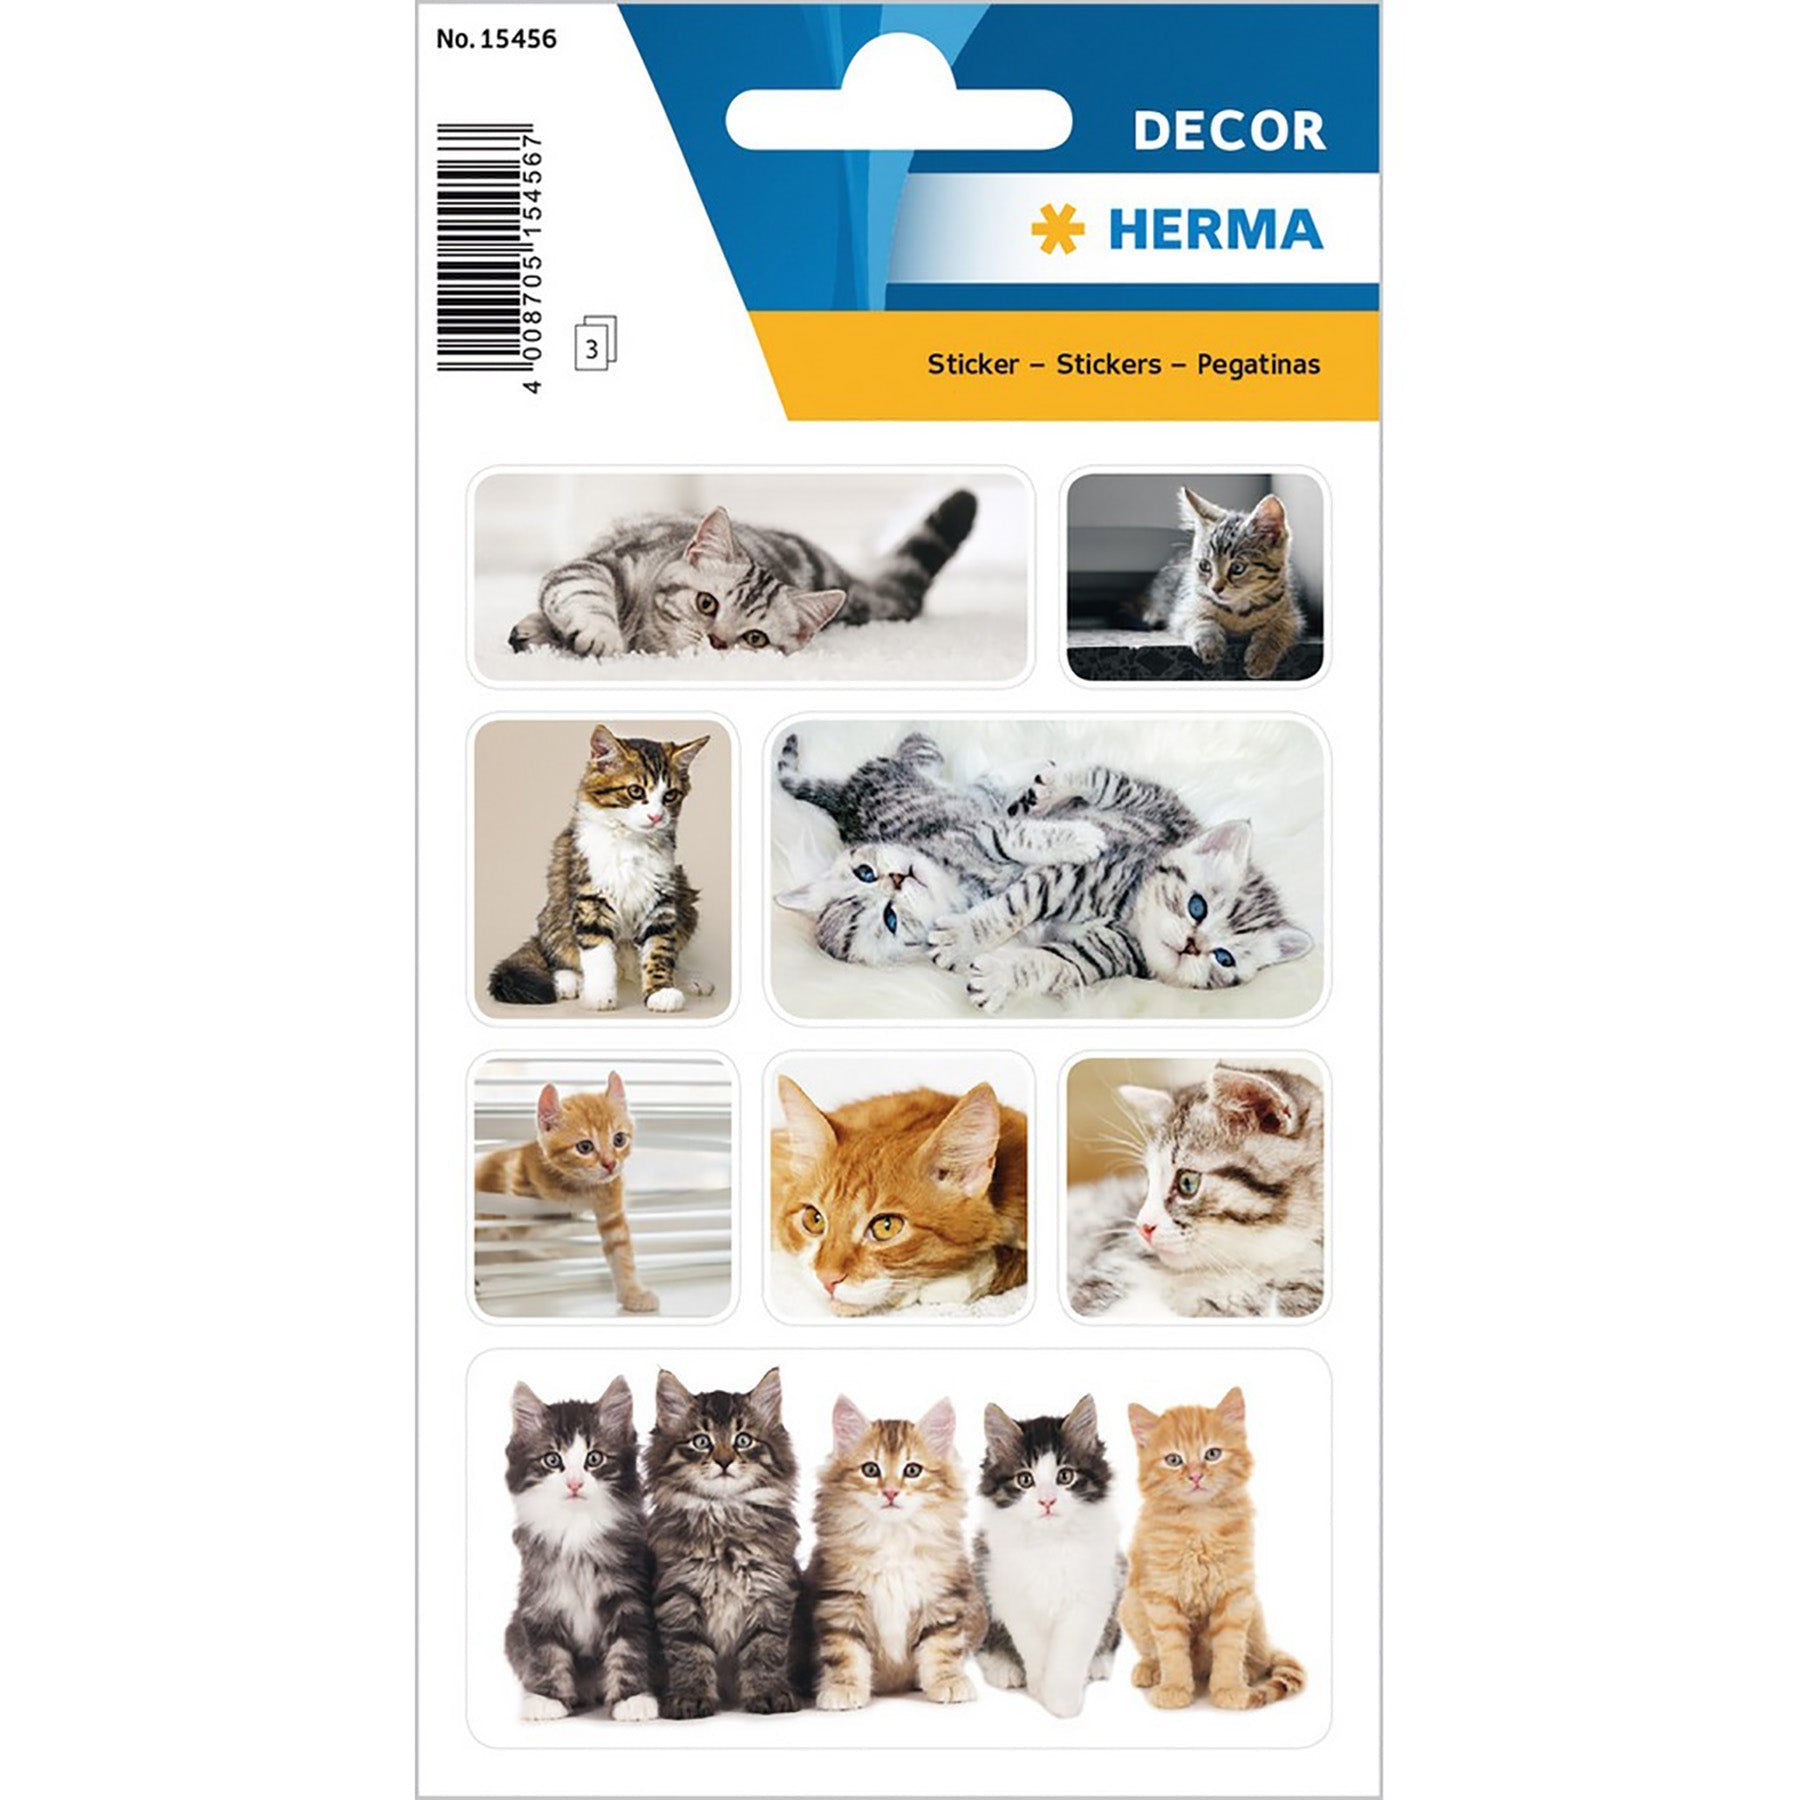 Herma Décor 3 Sheets Stickers Cats Children 4.75x3.1in Sheet